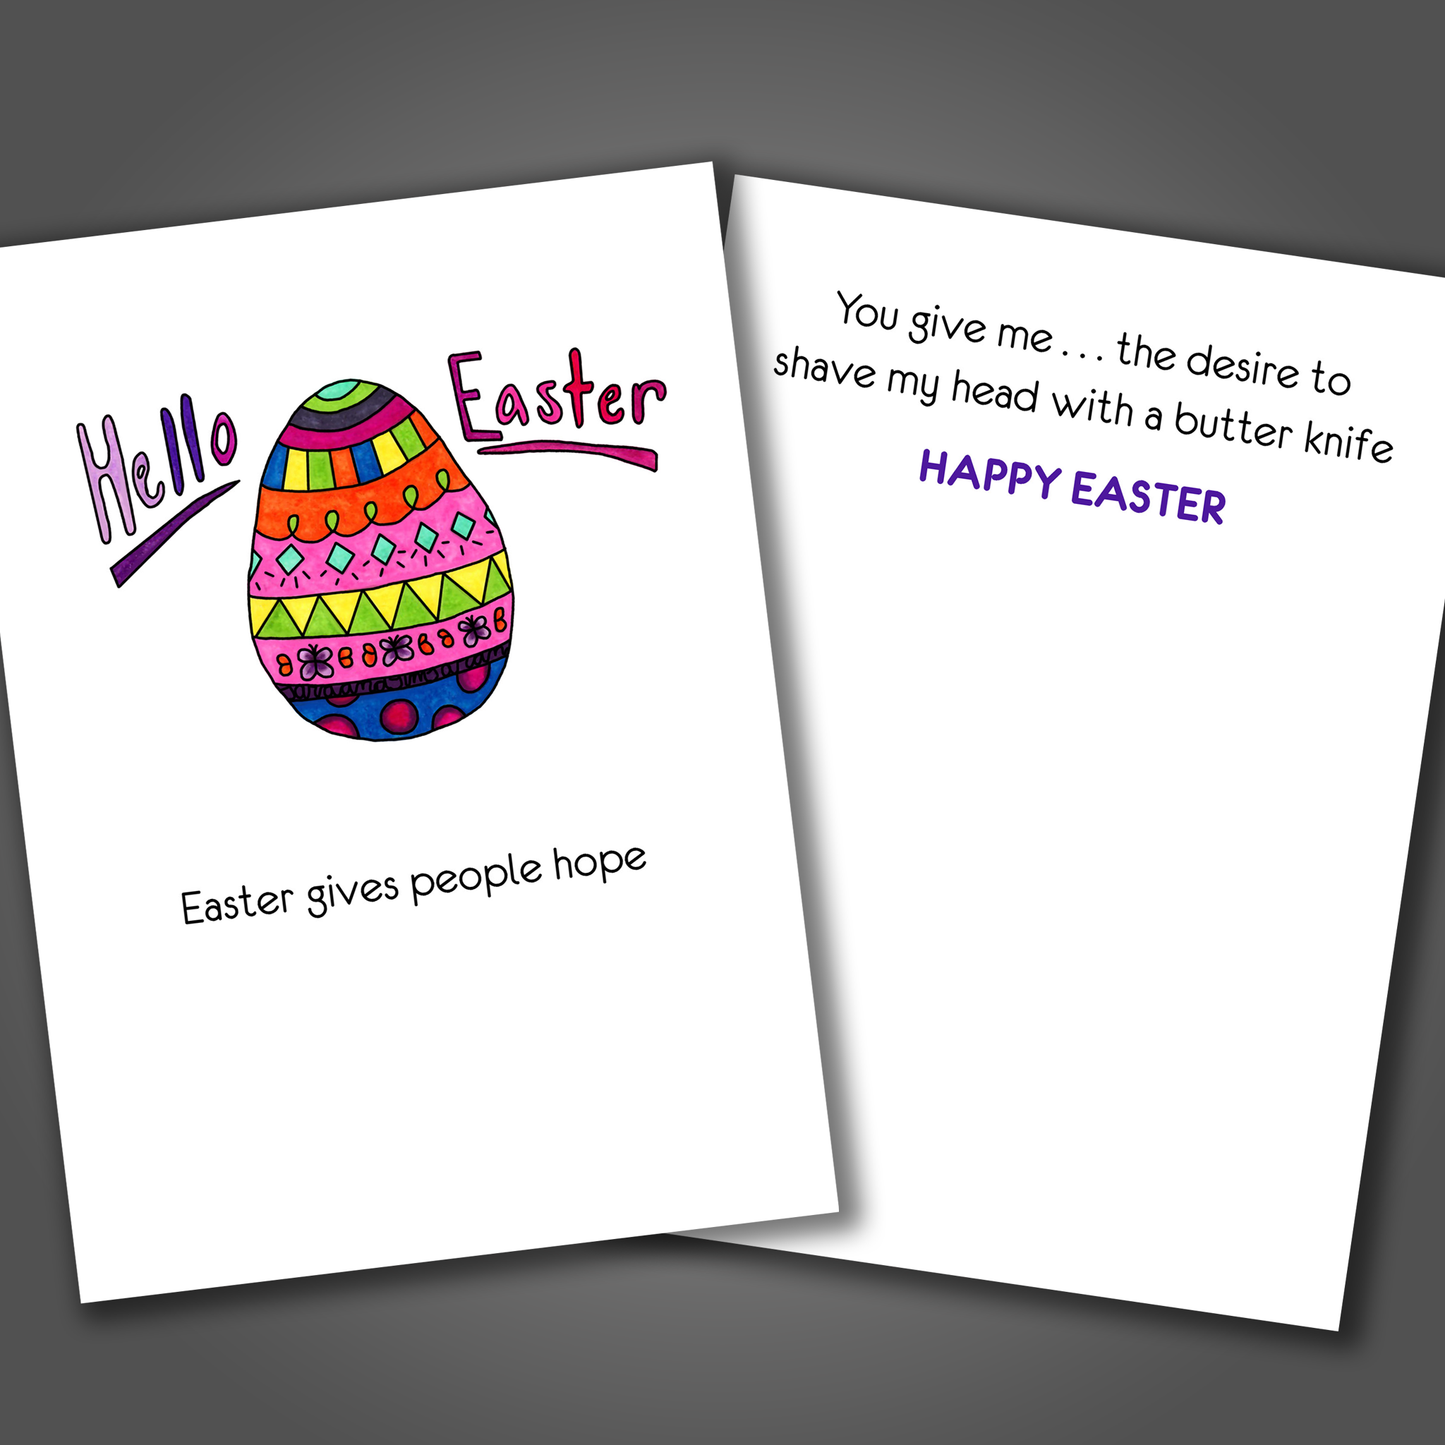 Happy Easter card with an Easter egg drawn on the front of the card. Inside the card is a joke that says you give me the desire to shave my head with a butter knife!